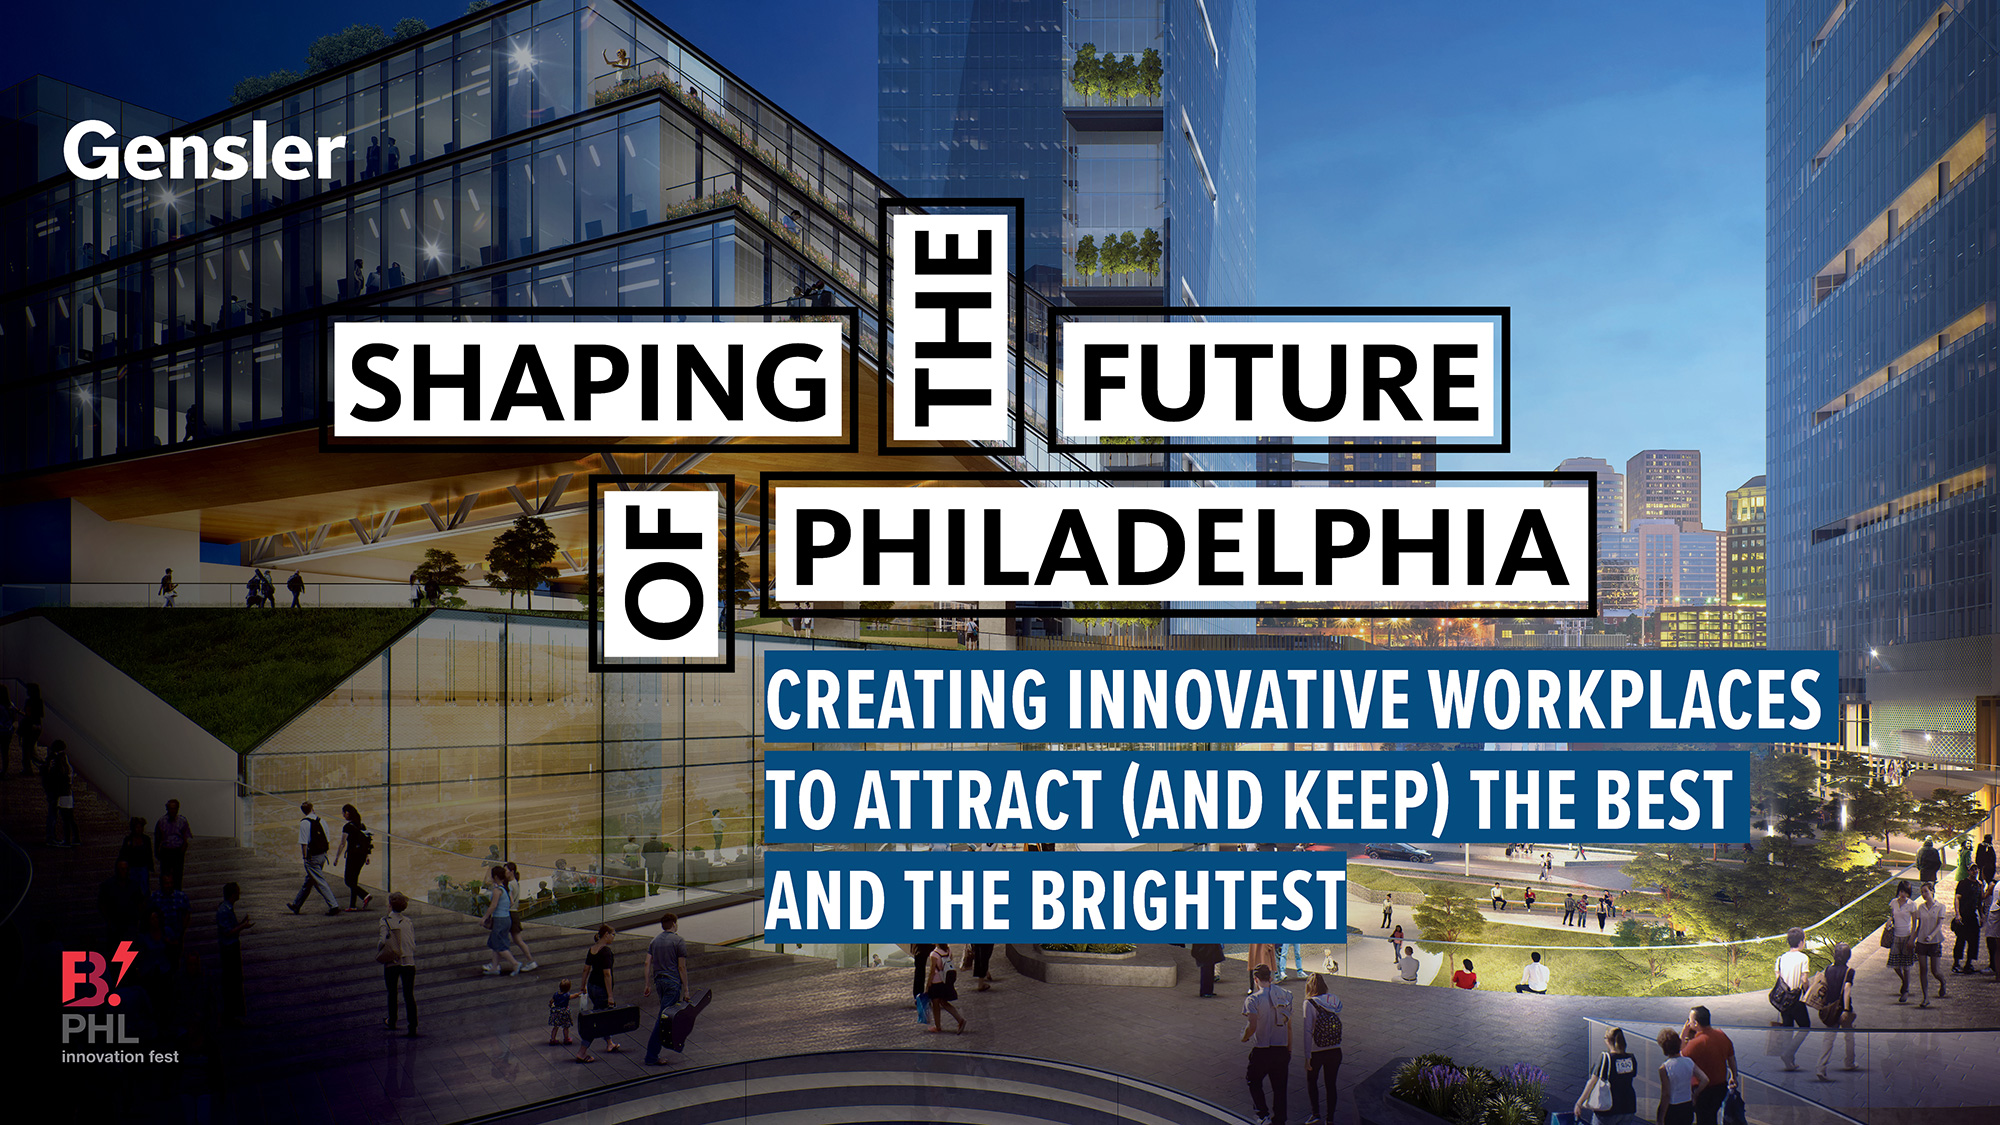 Design Forecast Philadelphia Creating Innovative Workplaces to Attract